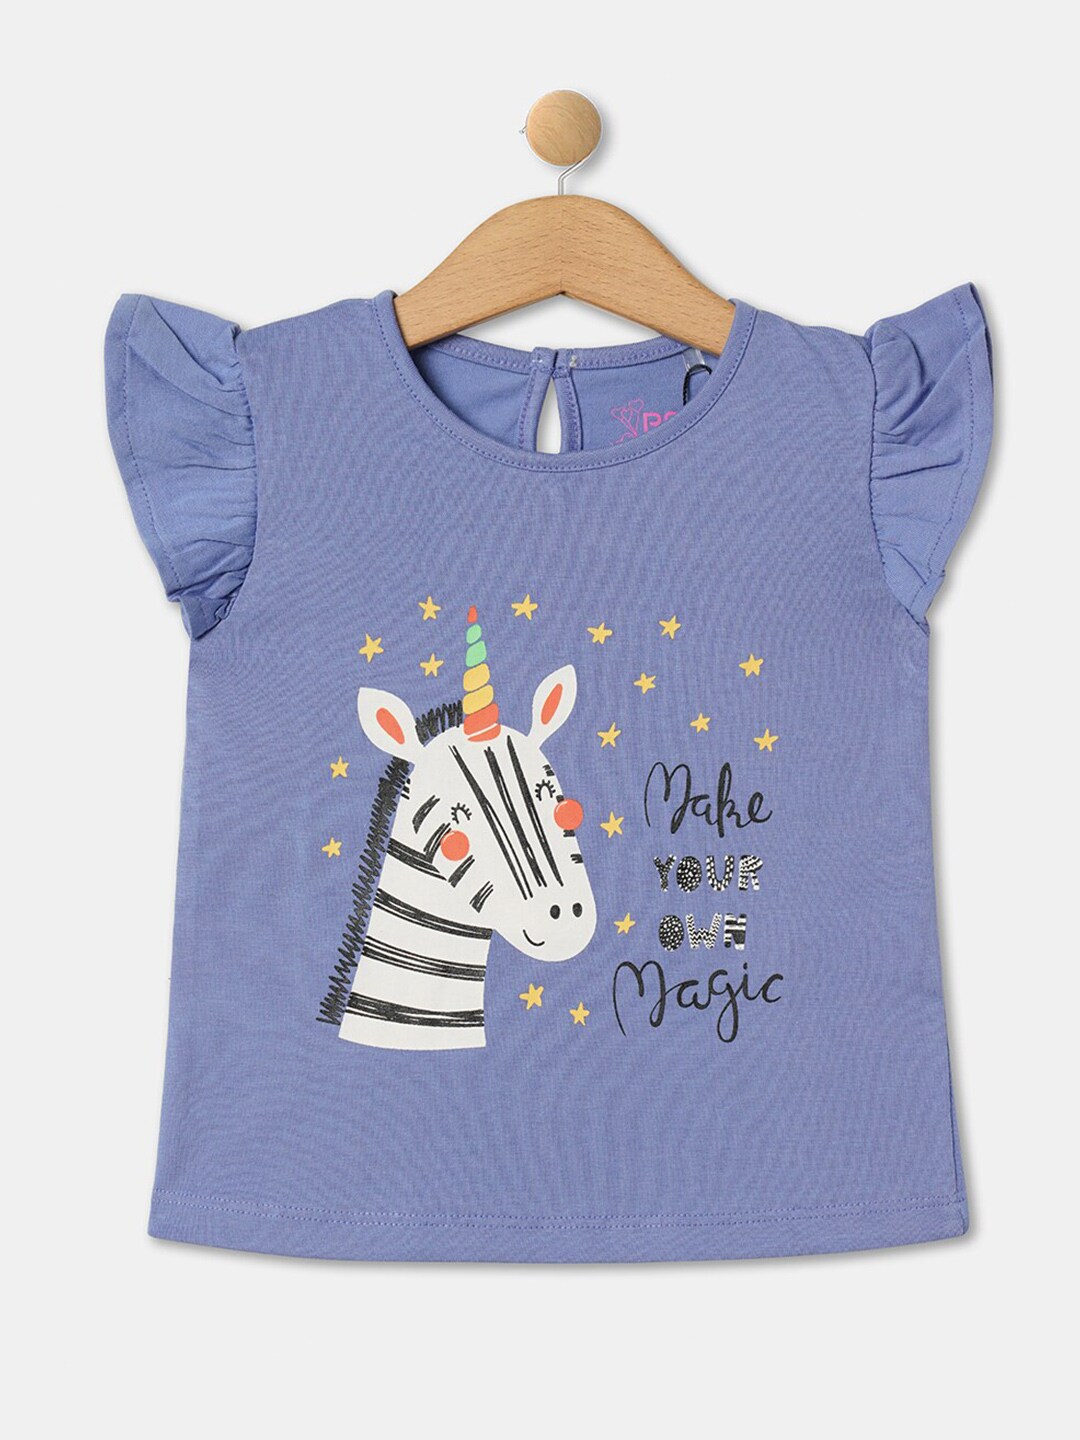 R&B Infants Girls Graphic Printed Cotton Top Price in India